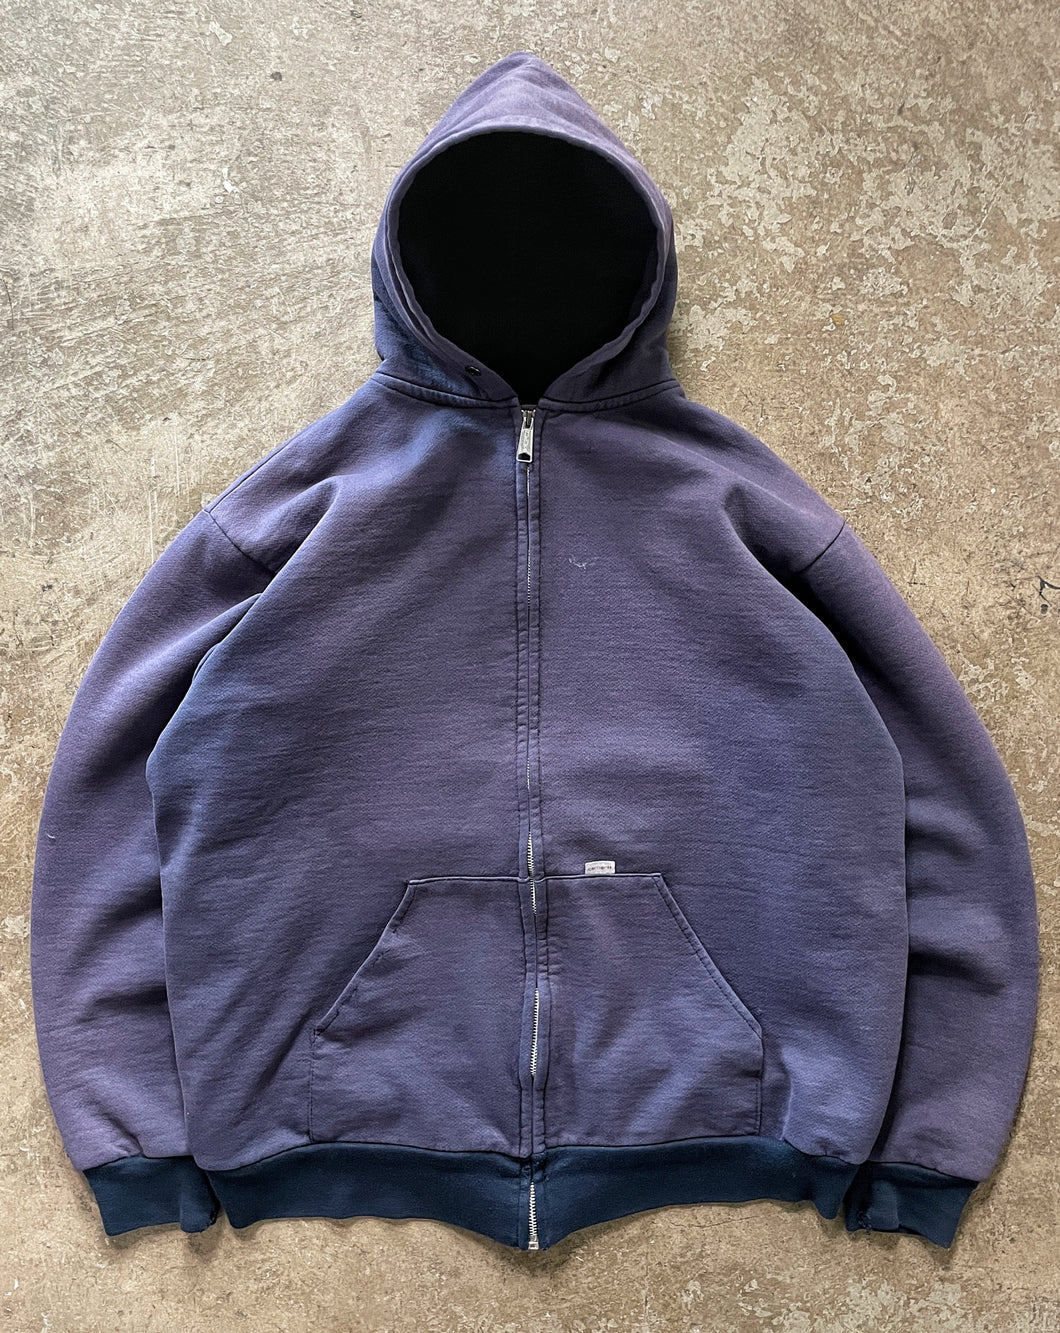 SUN FADED NAVY BLUE THERMAL LINED CARHARTT ZIP UP HOODIE - 1990S